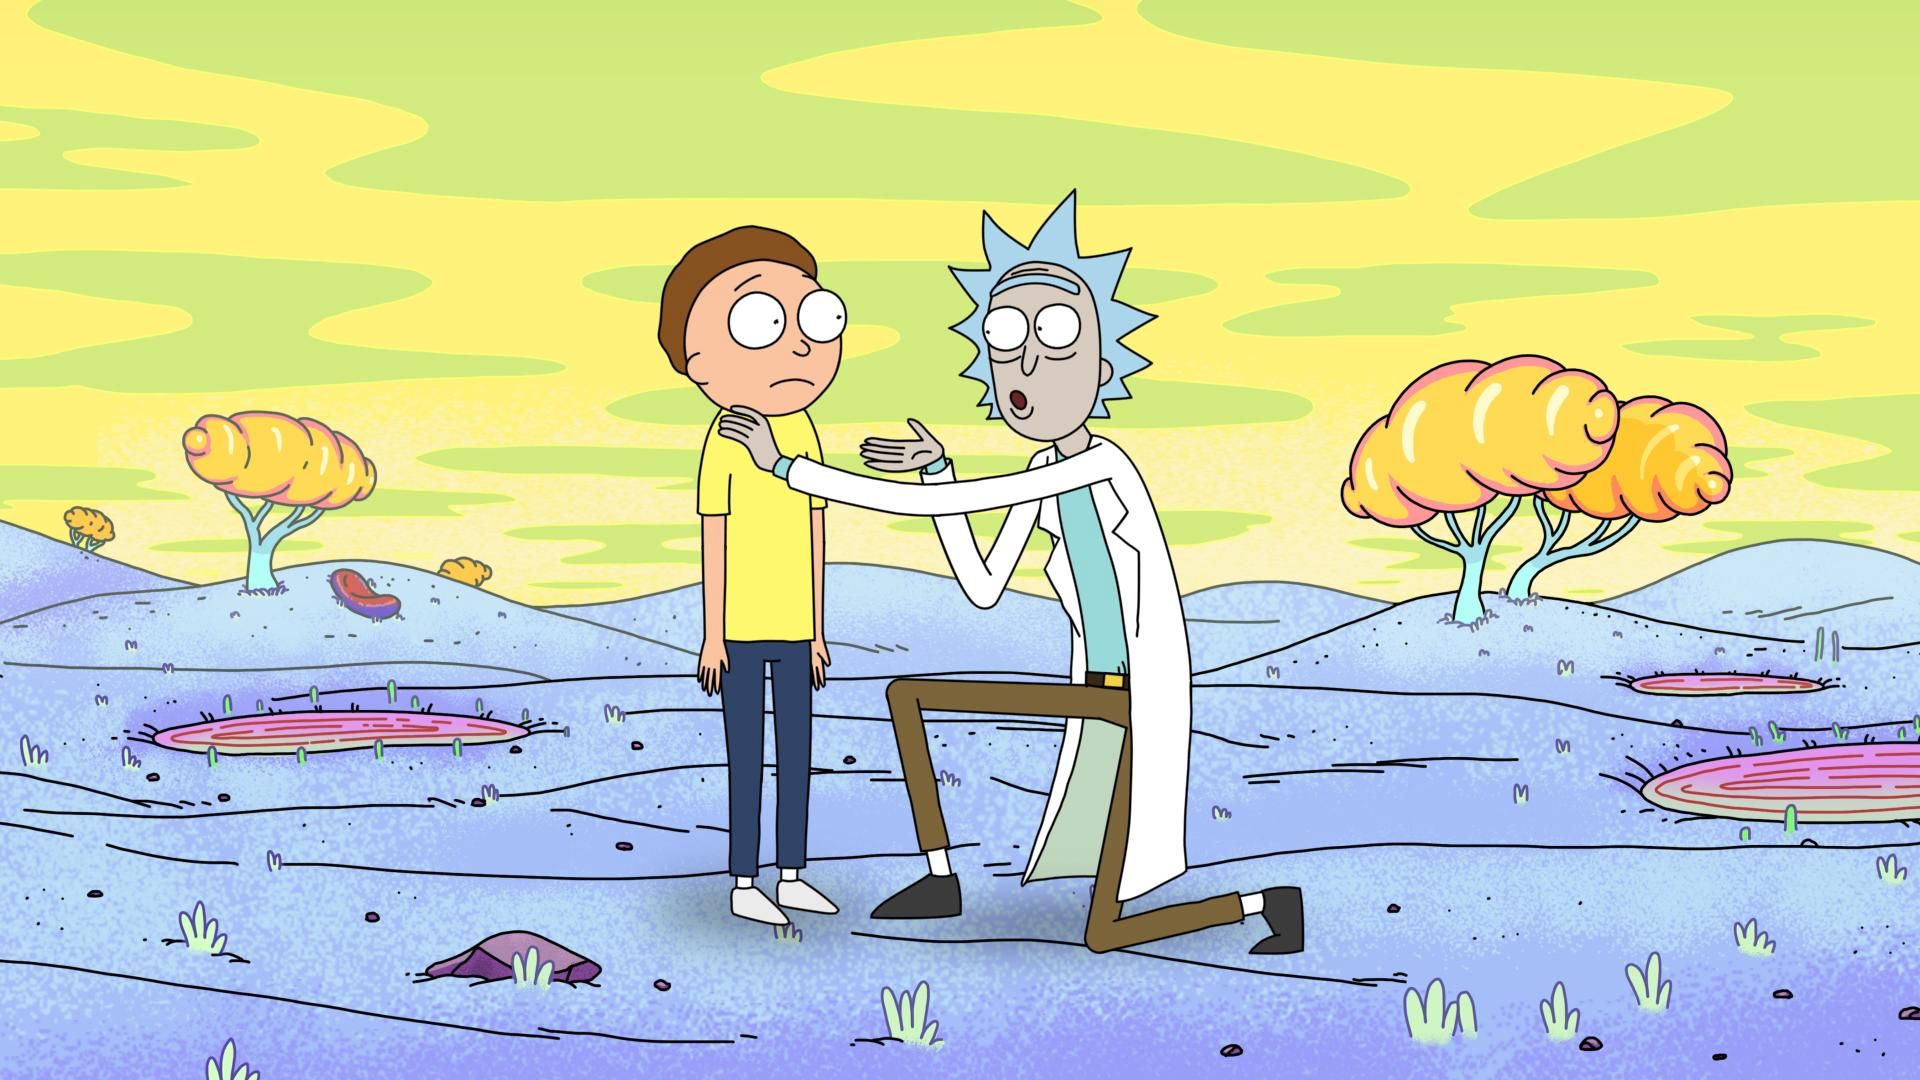 Rick and Morty’s Season 4 Premiere Is One Big Callback to the Pilot